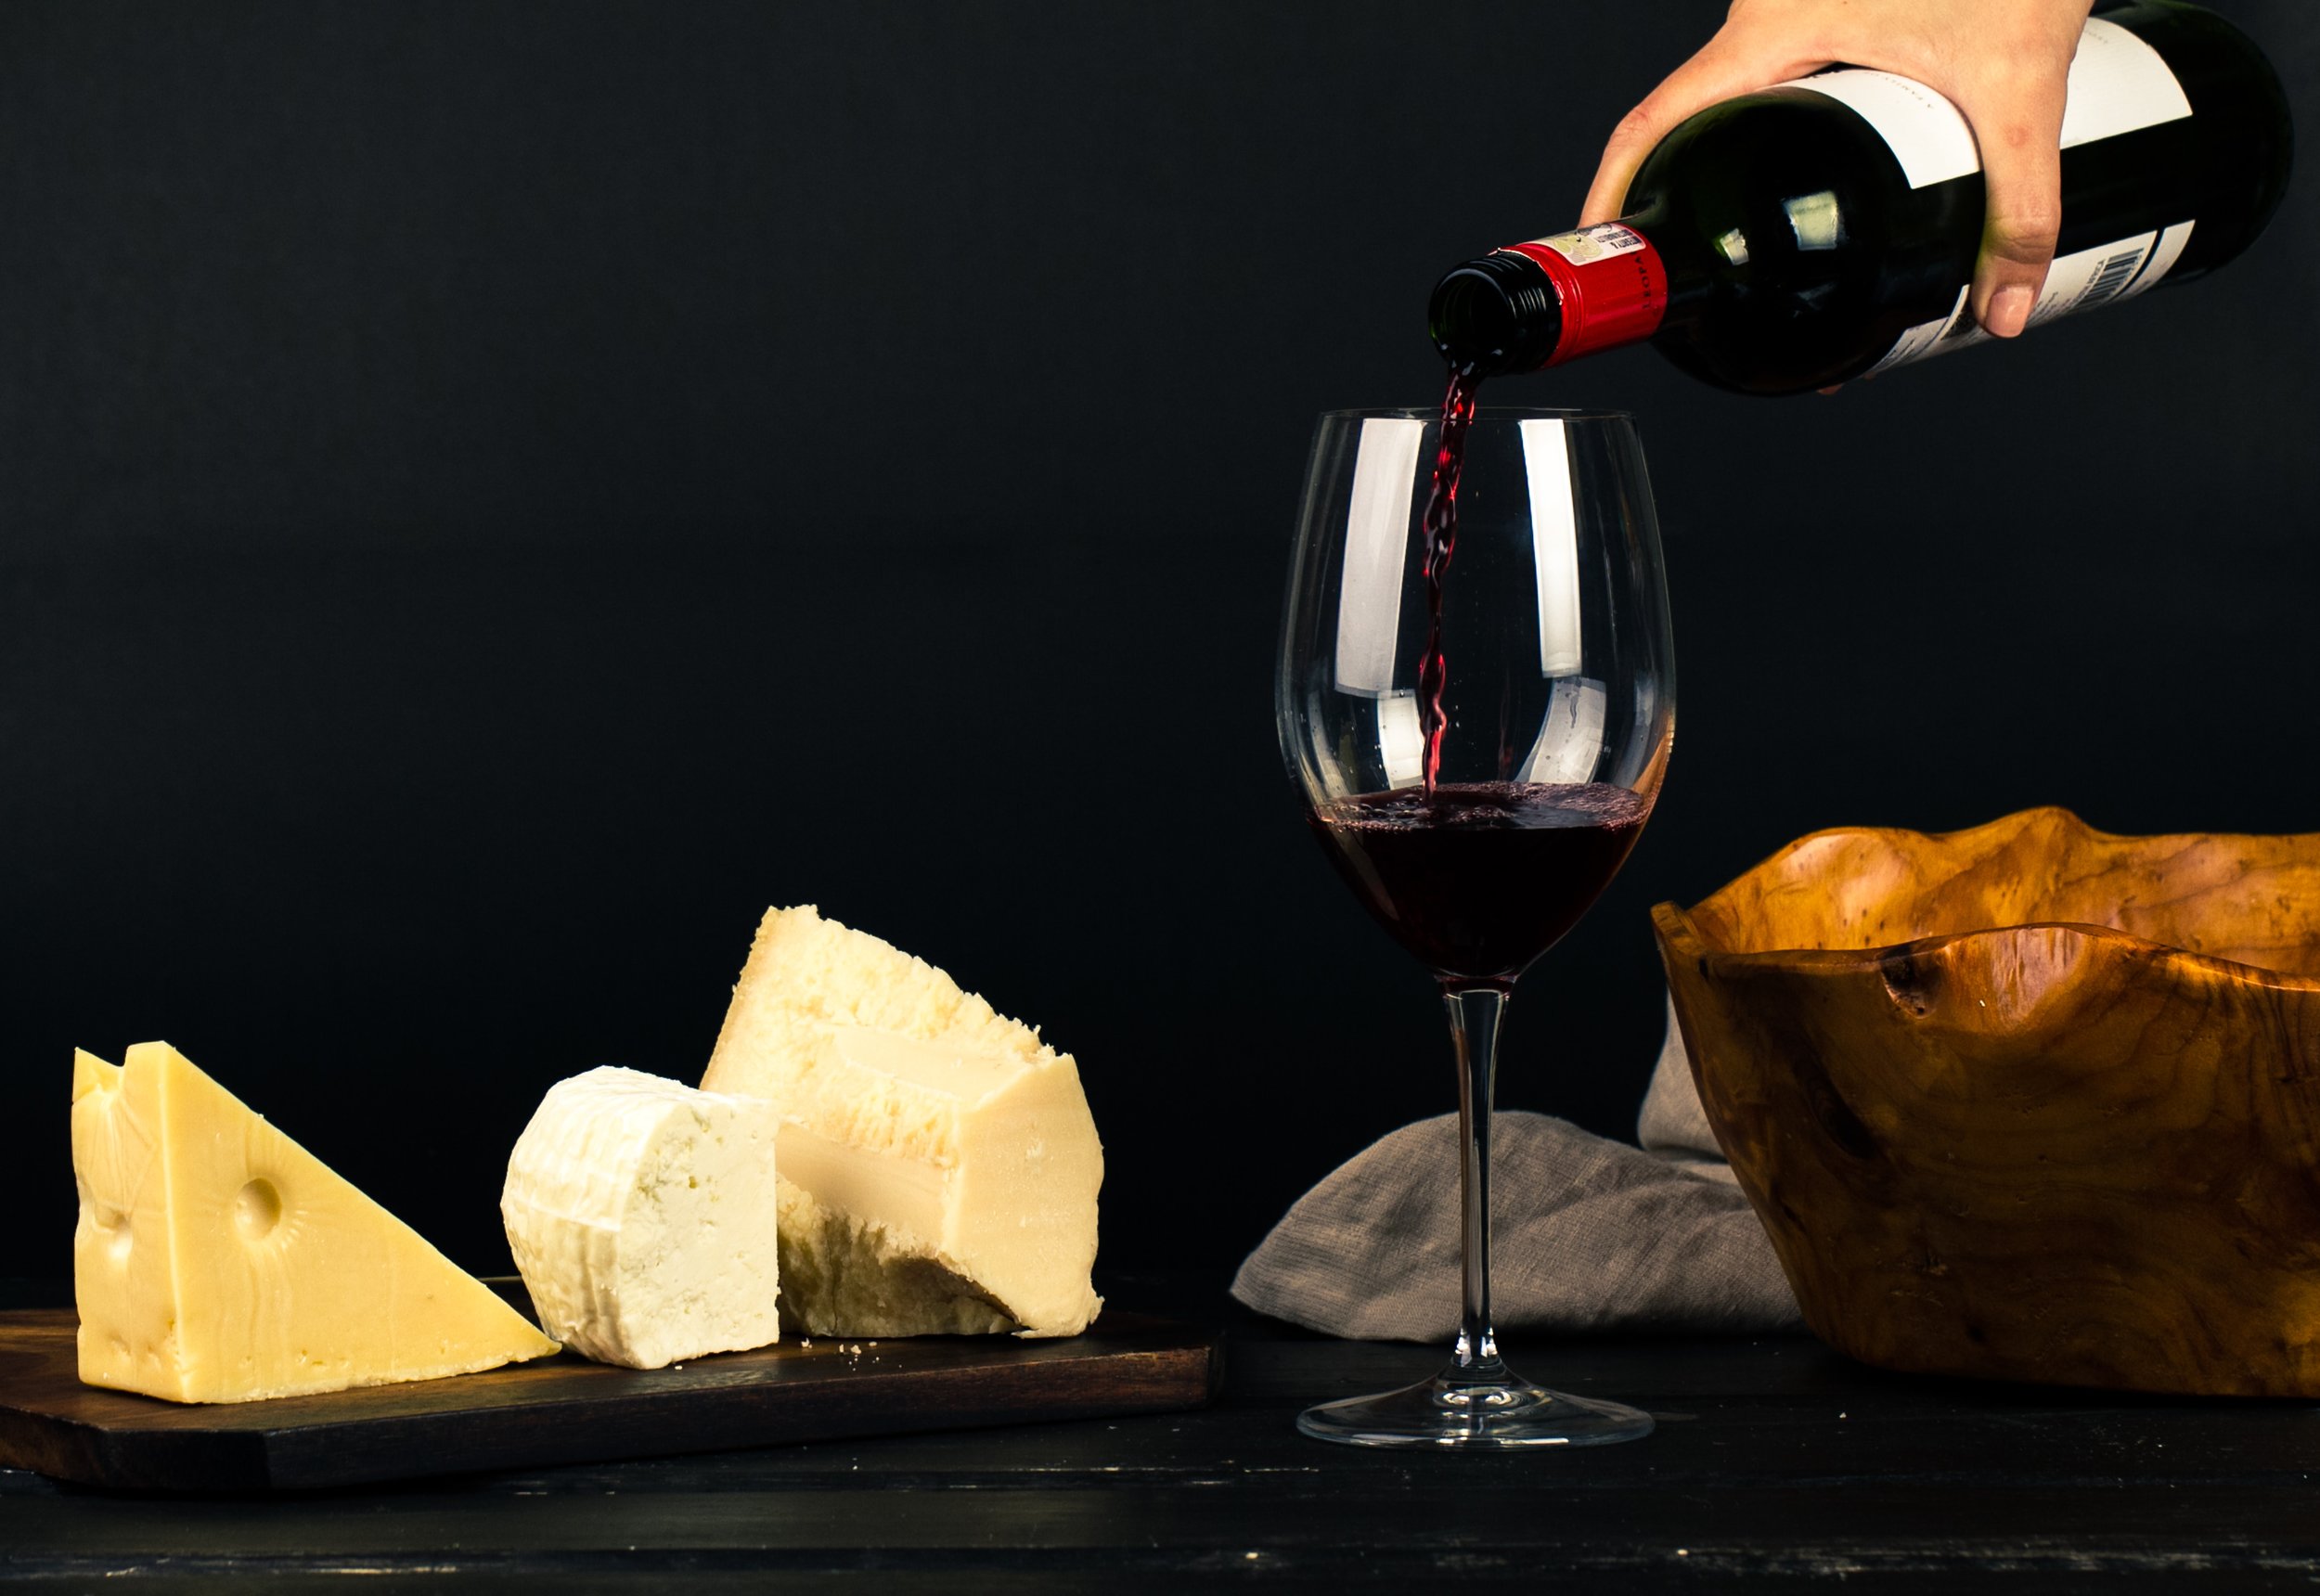 alcohol-cheese-drink-1545529.jpg Photo by Ray Piedra from Pexels.jpg